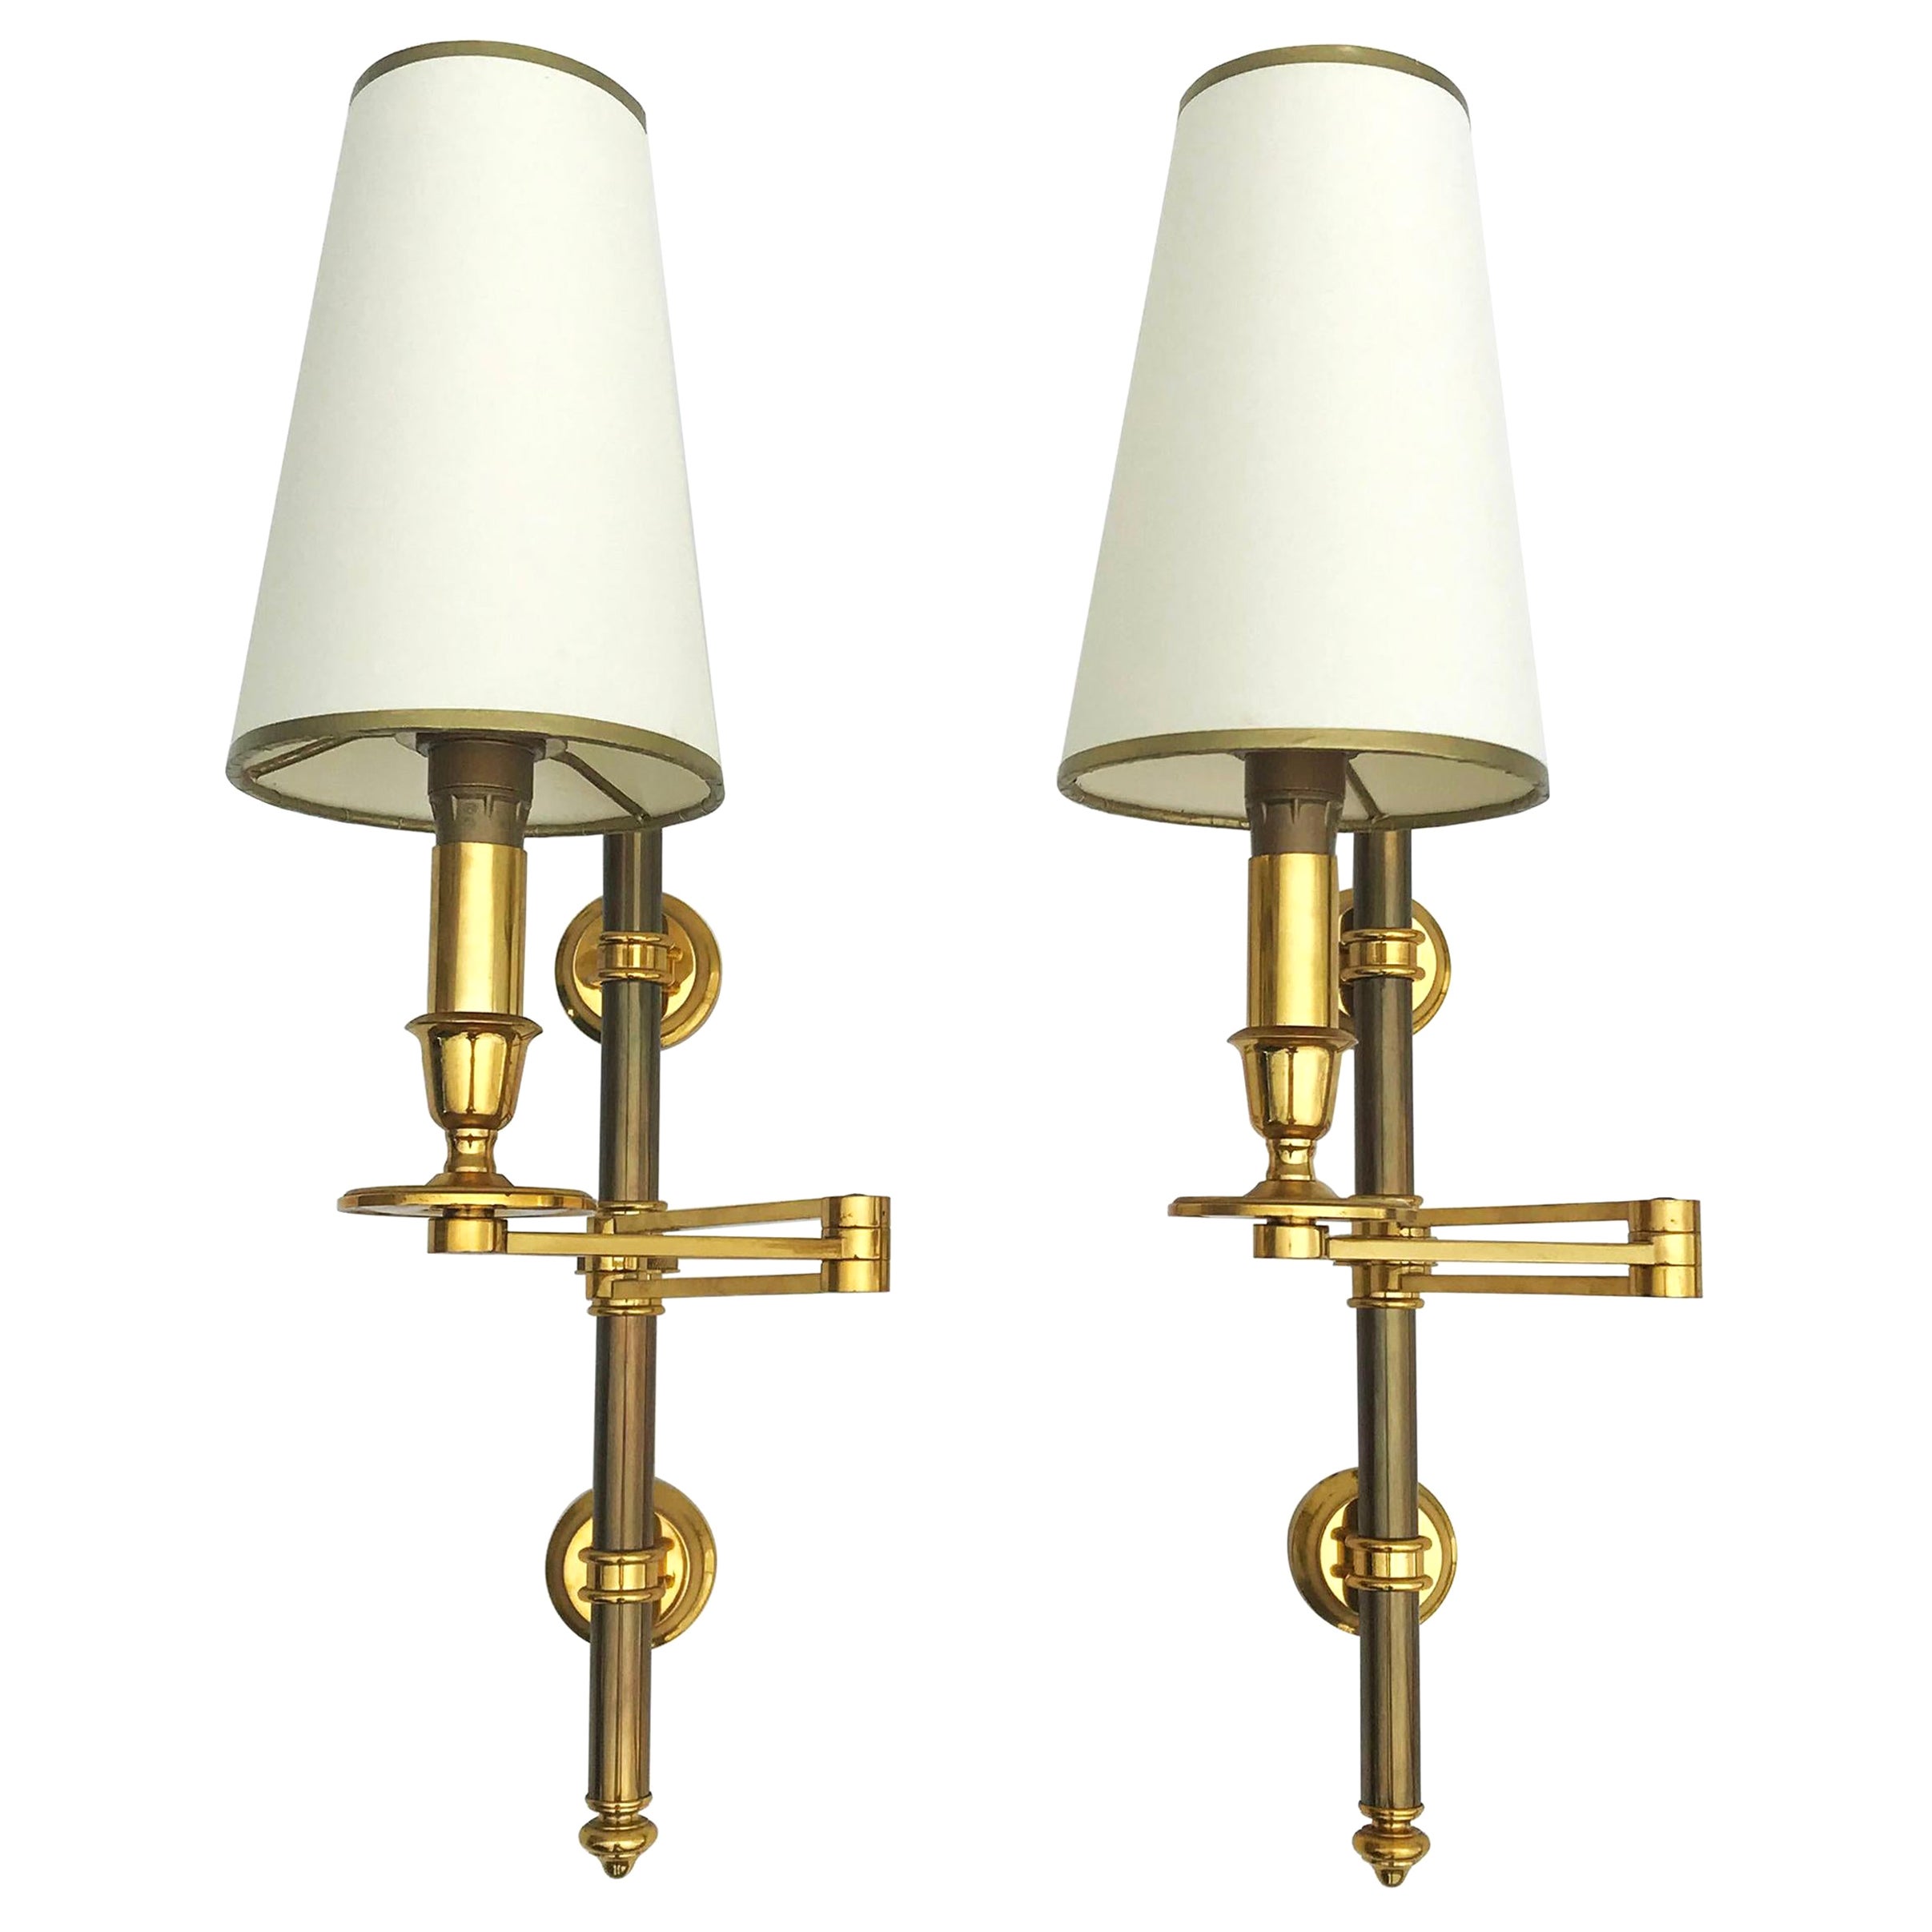 Pair of French Maison Jansen Swing Arm Sconces, 